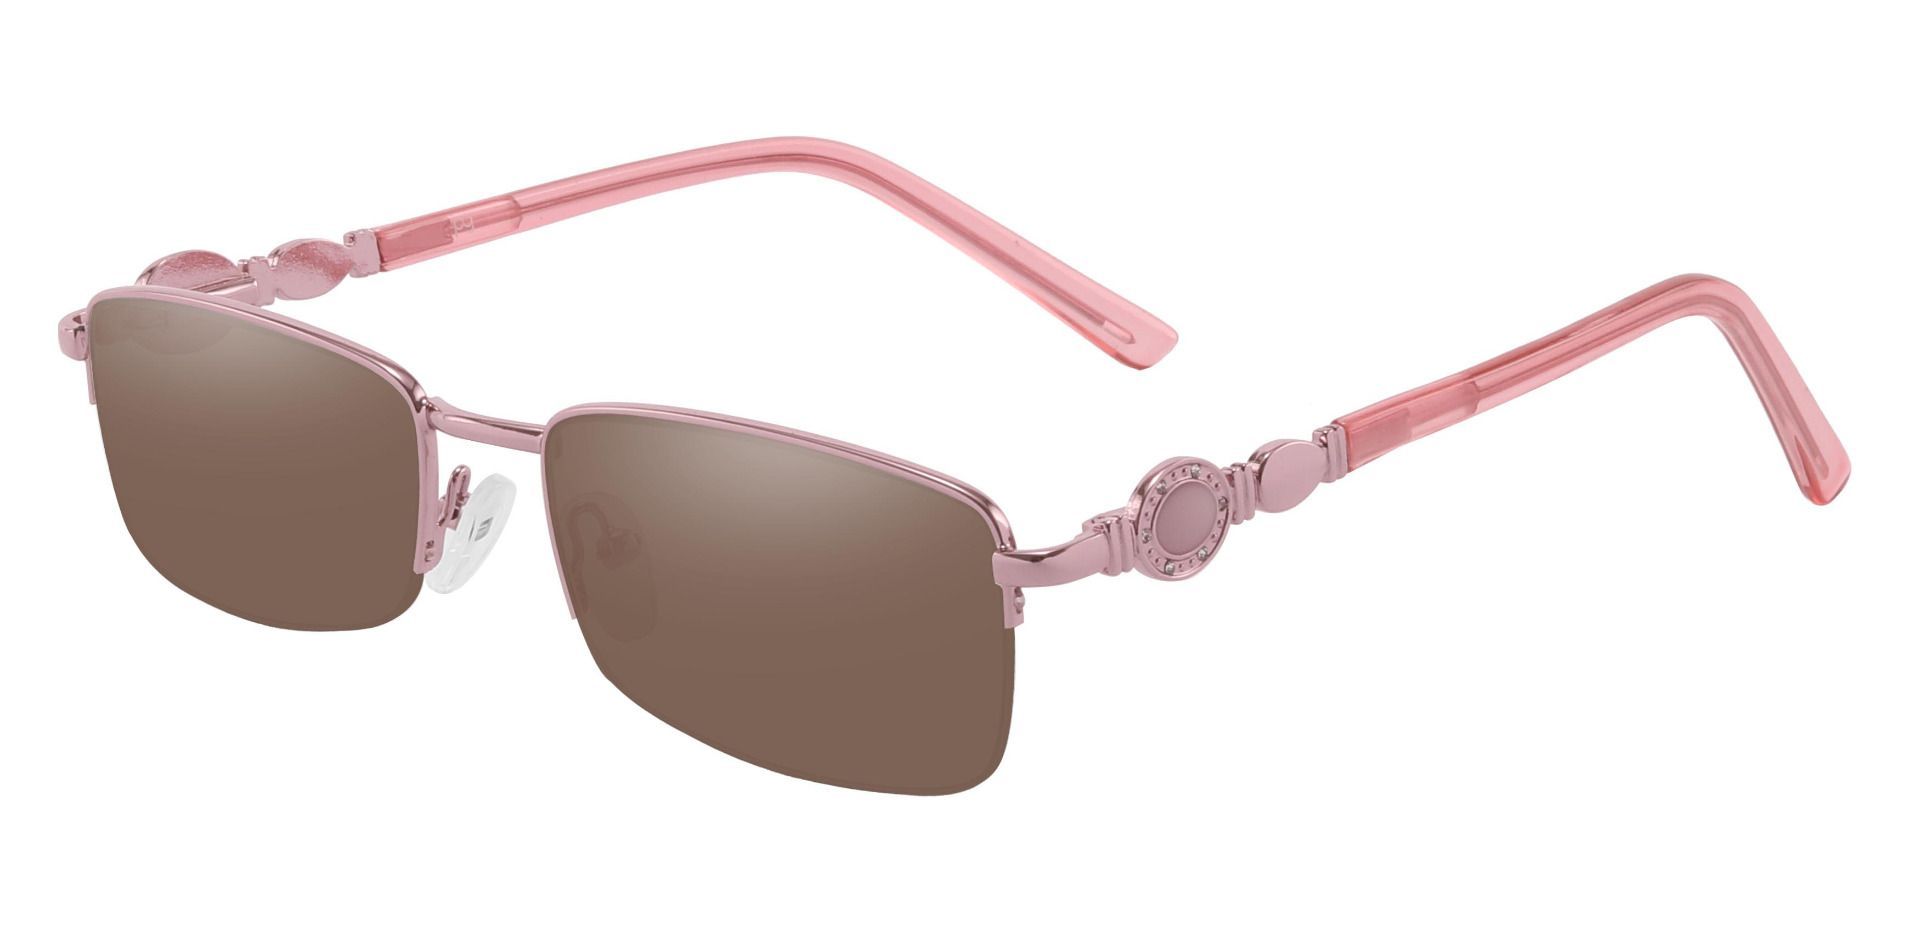 Crowley Rectangle Reading Sunglasses - Pink Frame With Brown Lenses